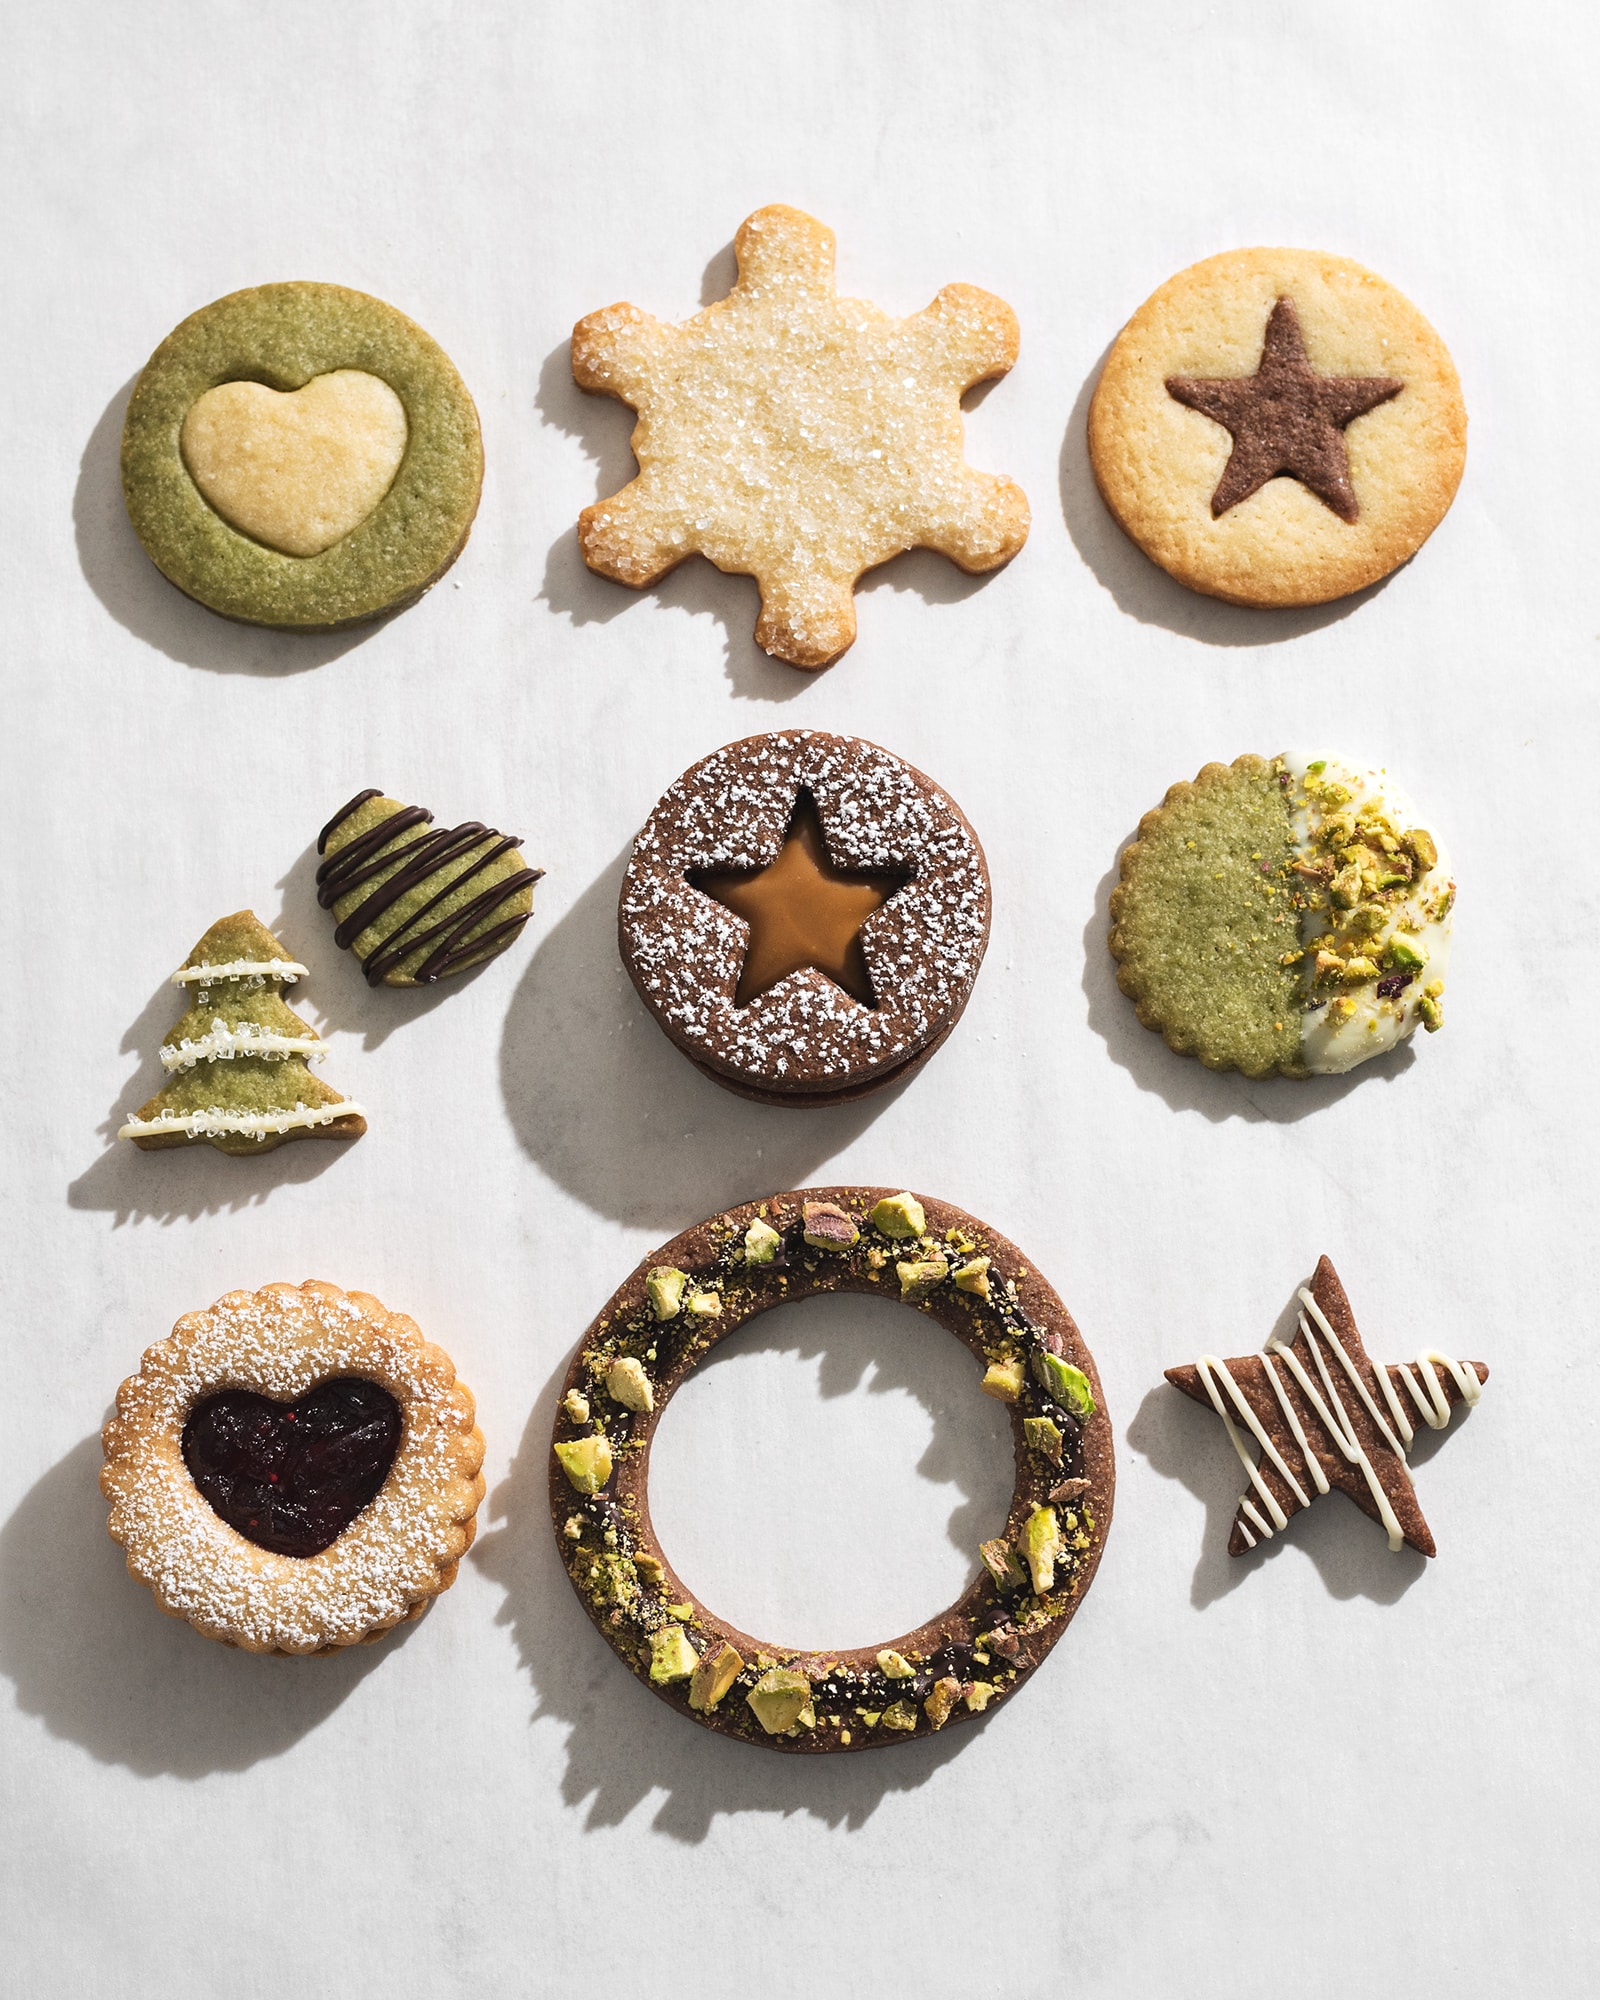 10 different decorated butter cookies with star and heart cutouts, chocolate drizzles, and pistachios.